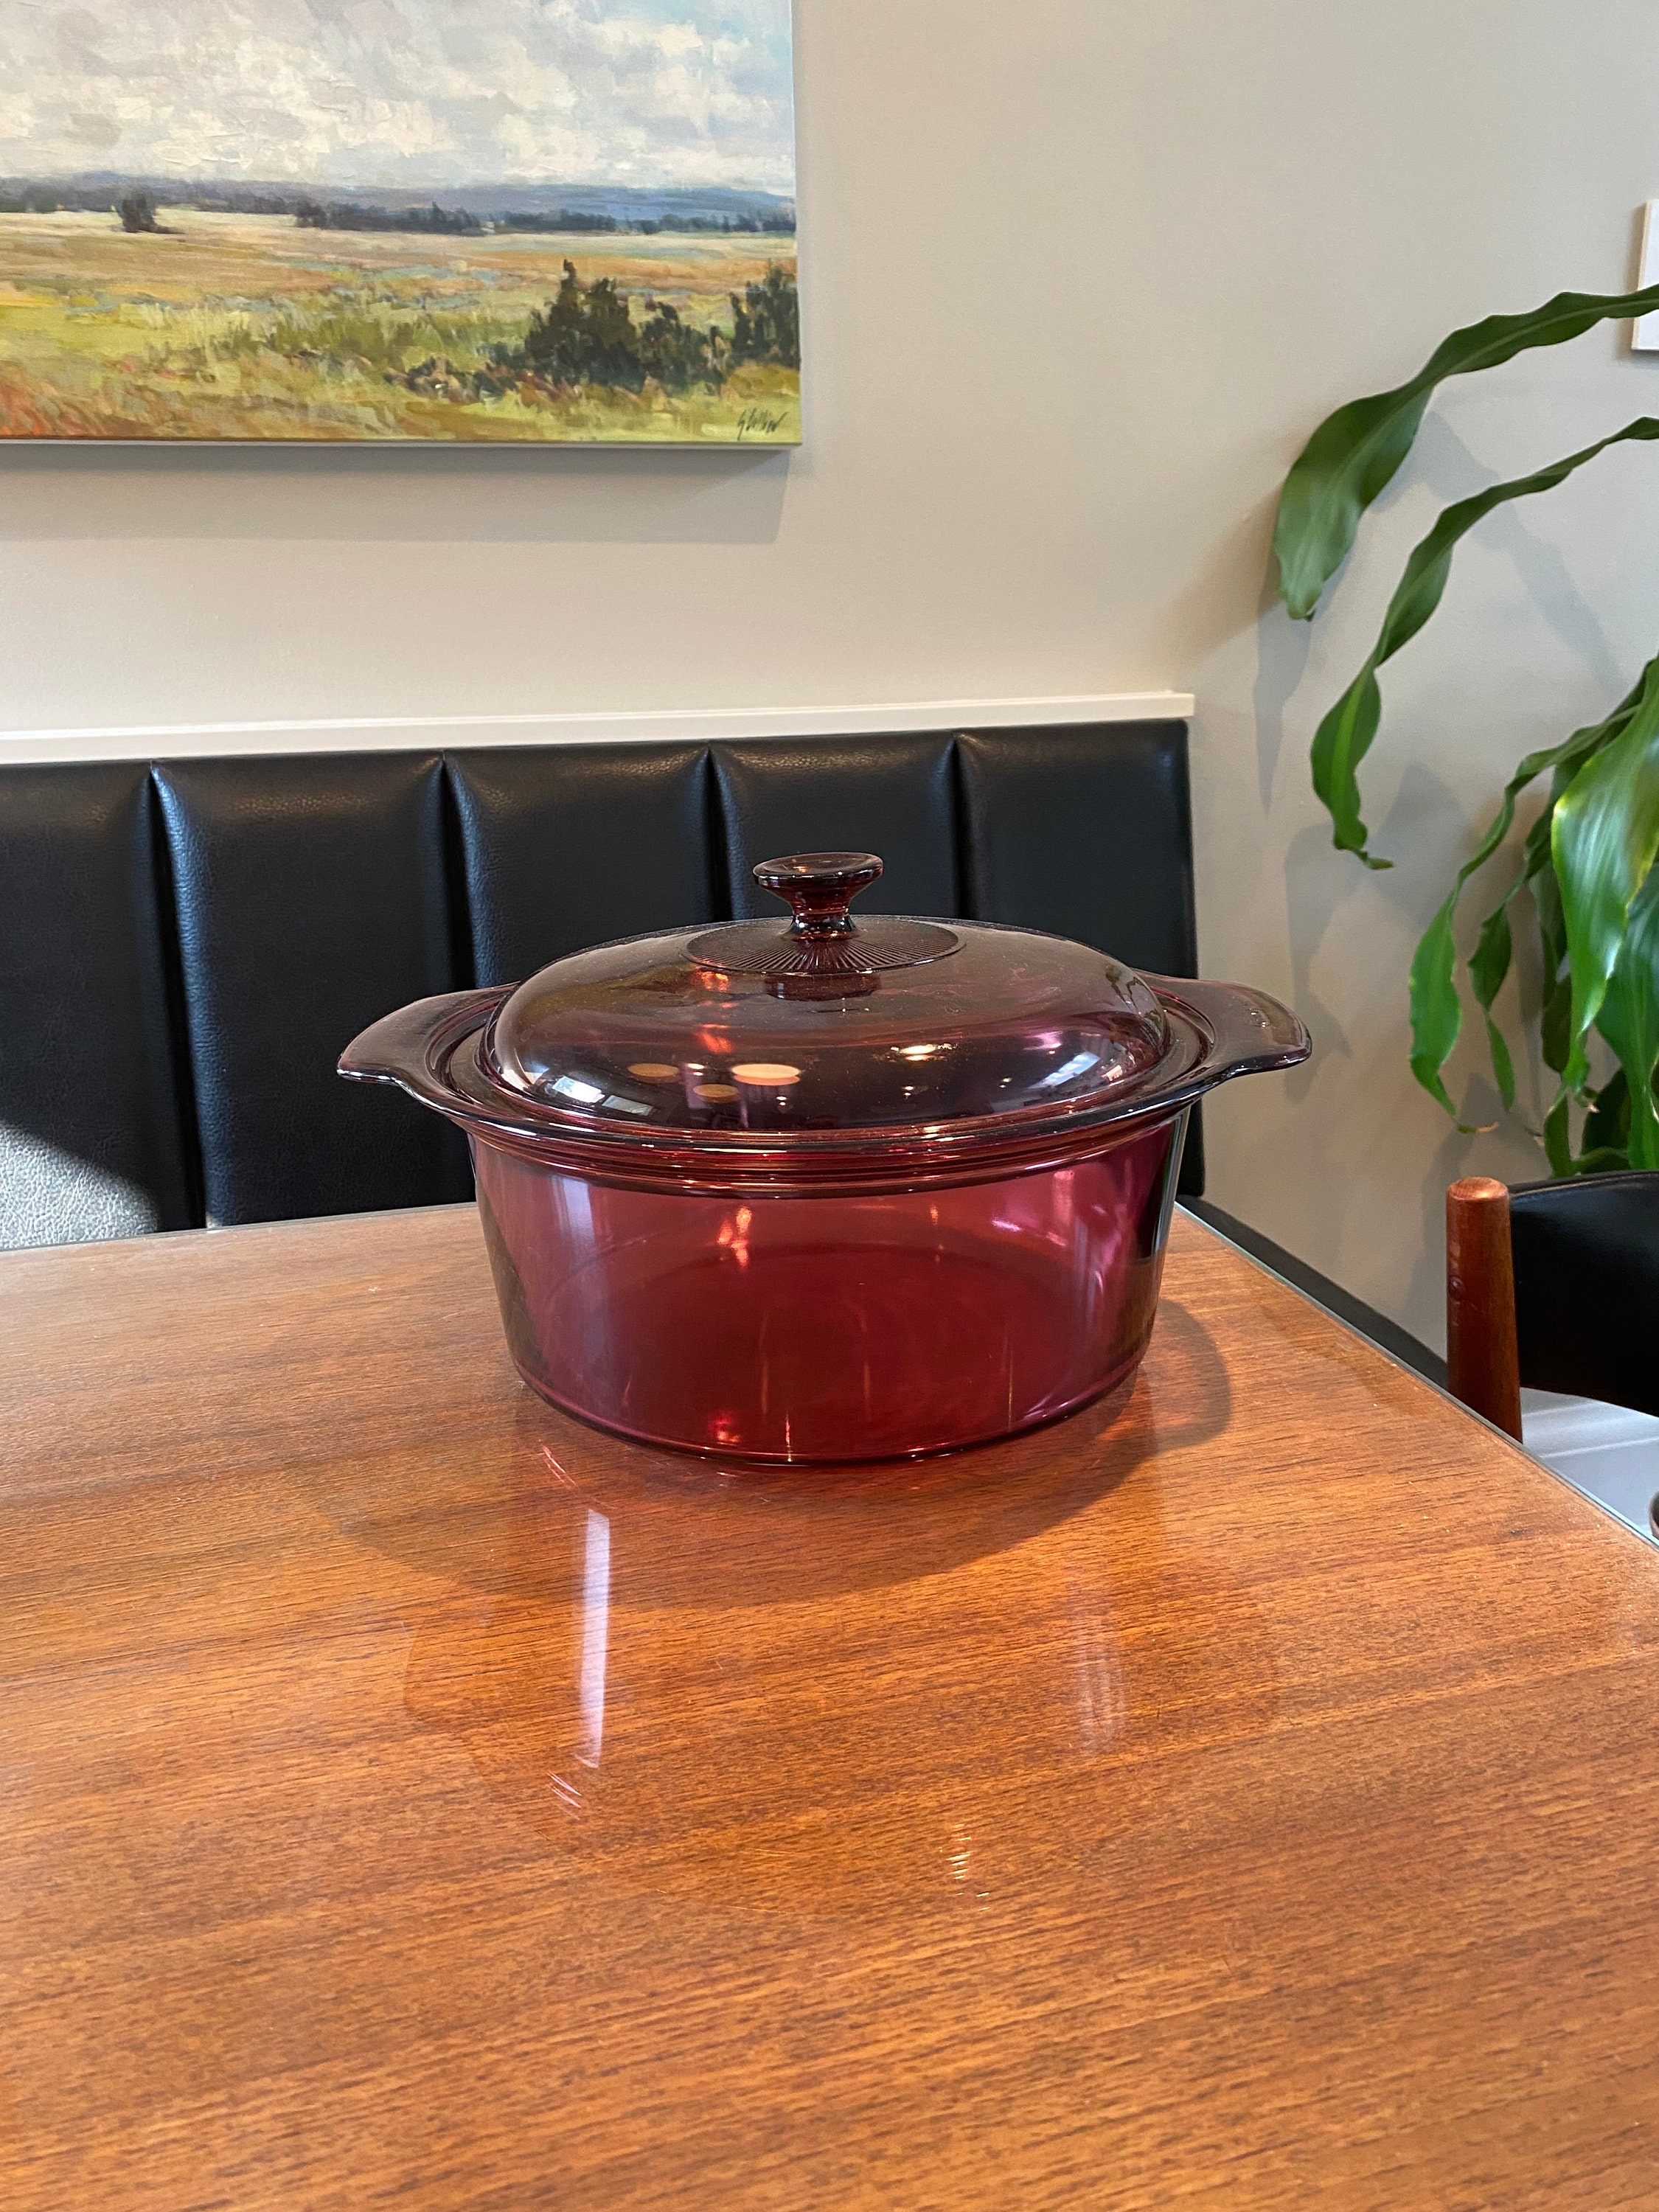 Visions 5L Round Dutch Oven With Glass Lid/Cover